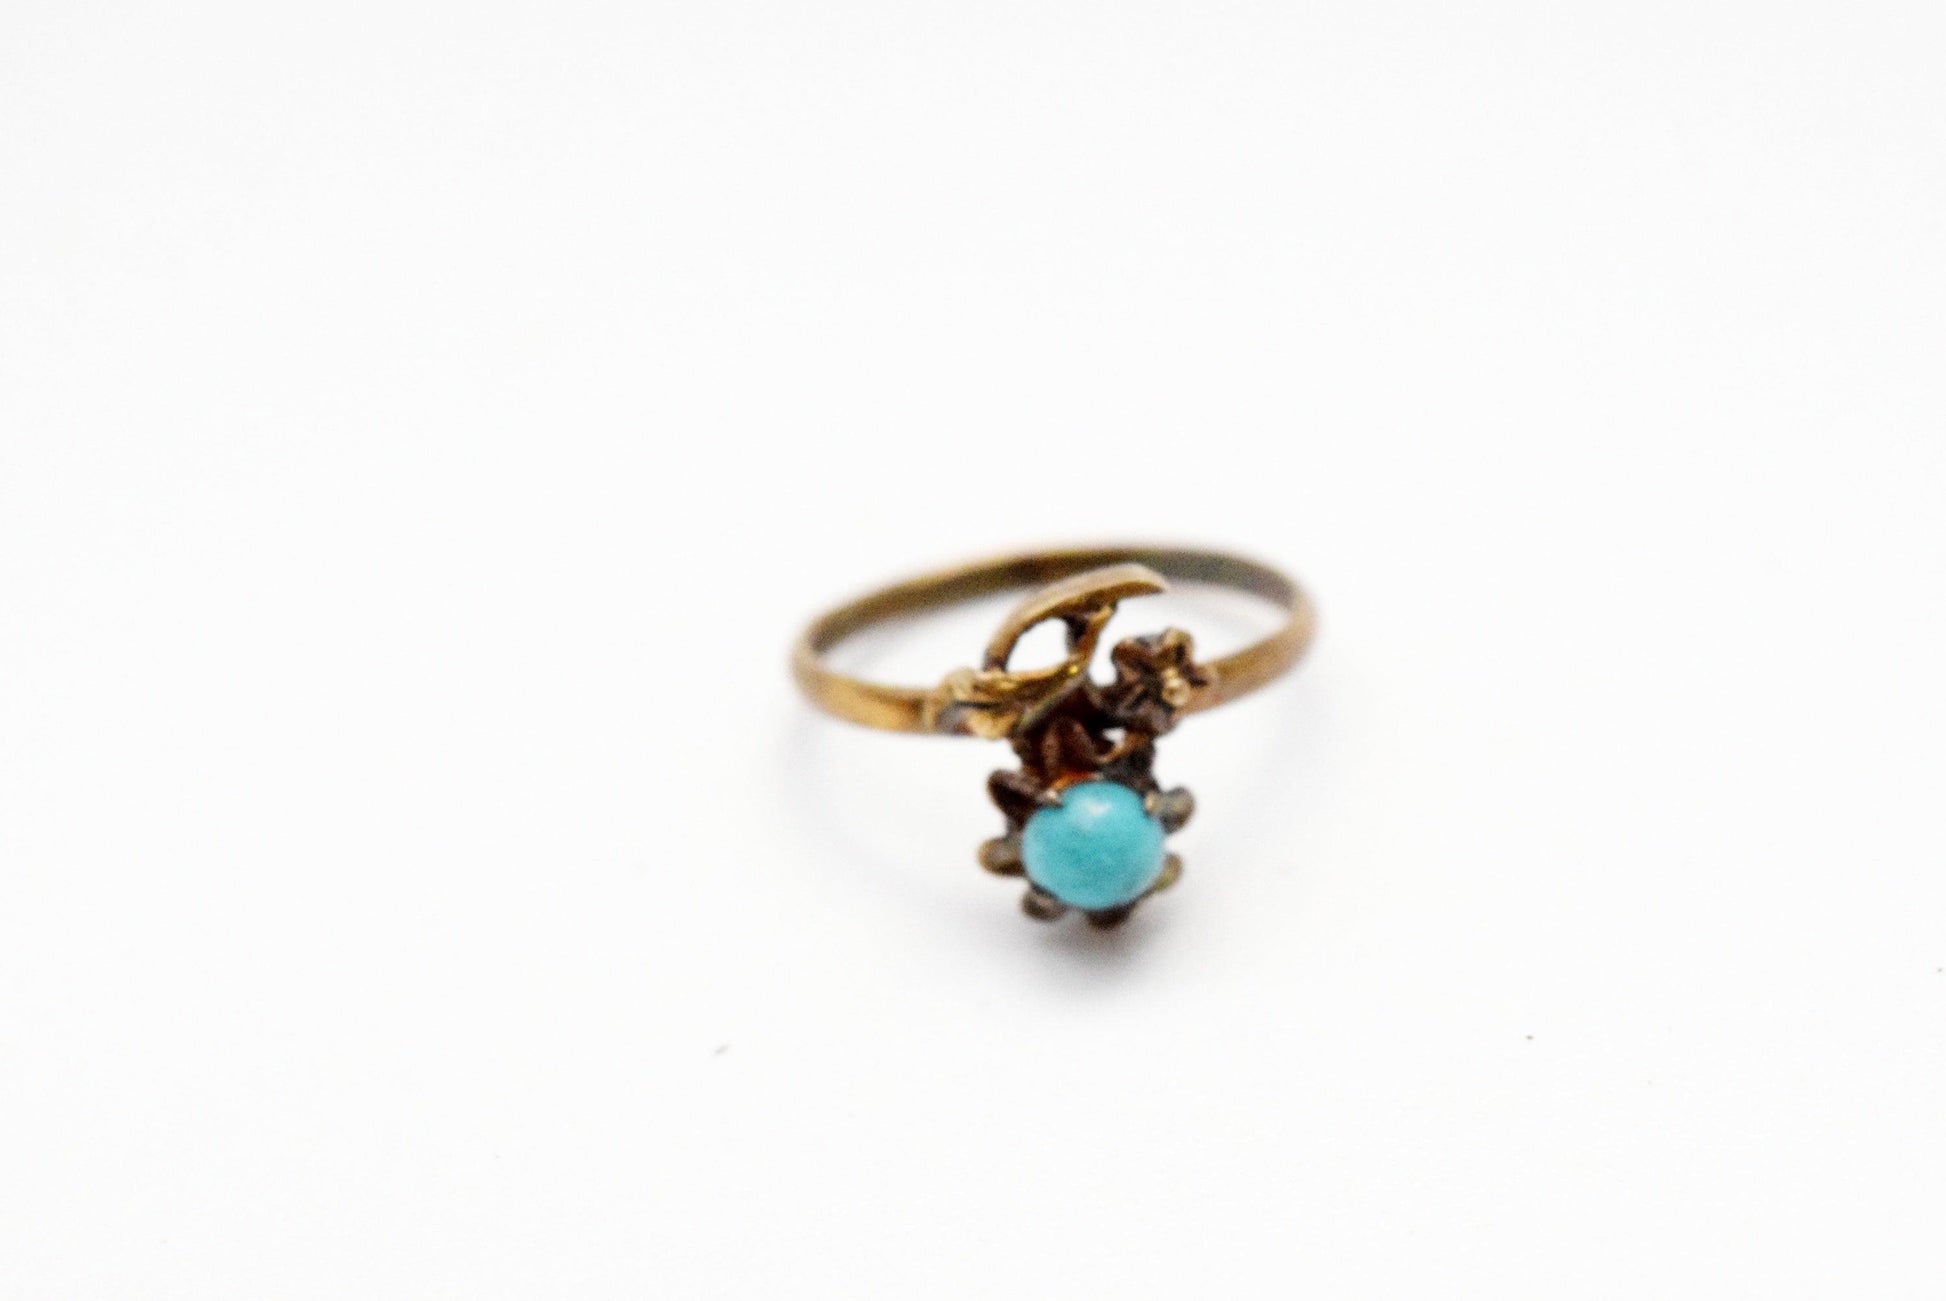 Chinese Export Silver and Turquoise Flower Ring - Anteeka